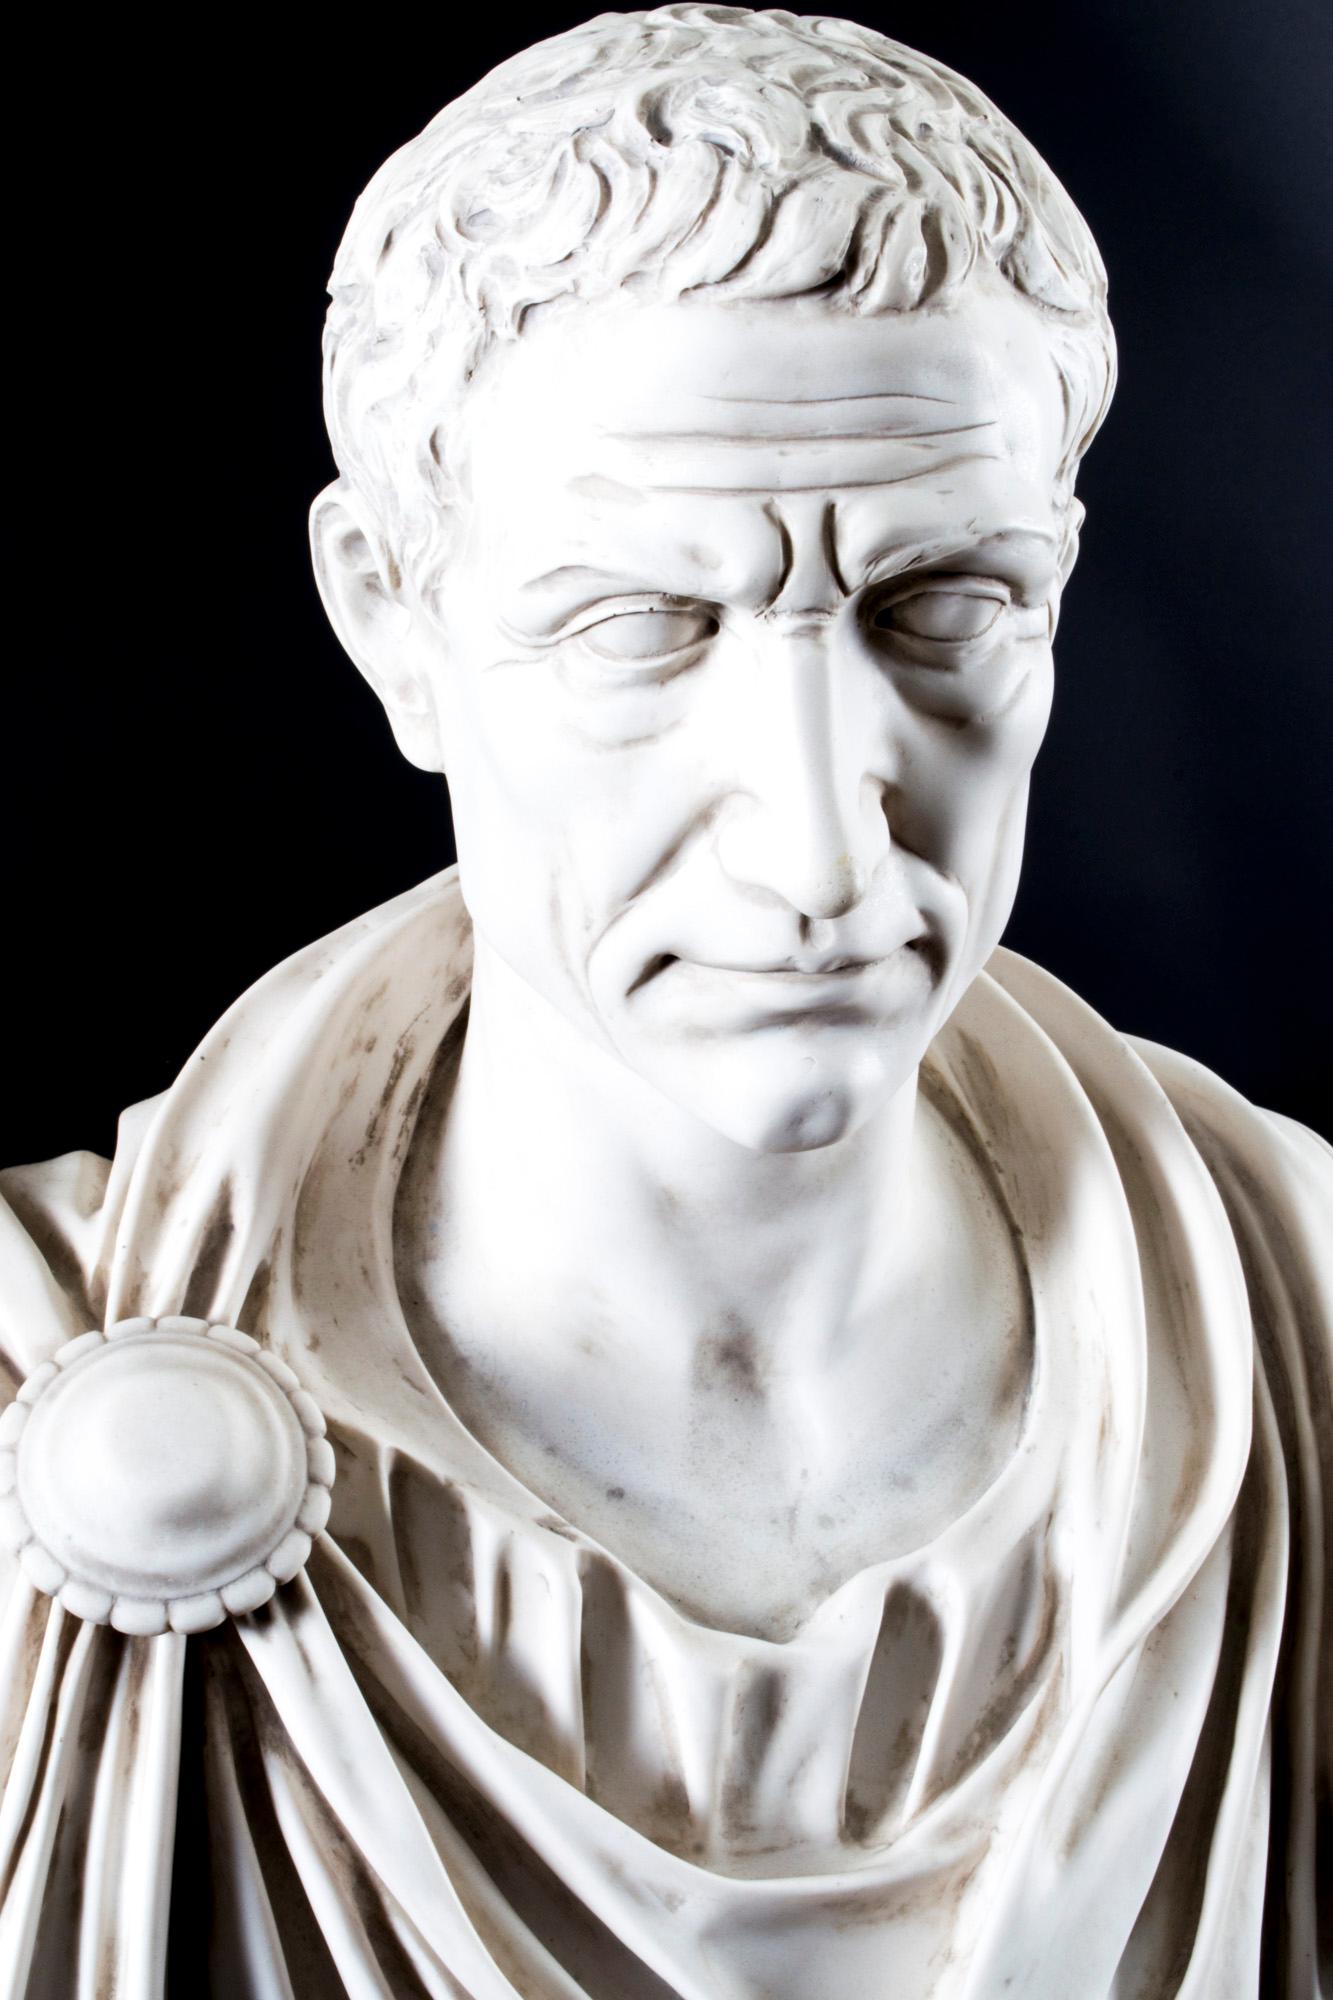 A beautifully sculpted marble bust of the Roman politician Marcus Brutus, dating from the last quarter of the 20th century.

The attention to detail throughout the piece is second to none and the figure is extremely lifelike.

This high quality